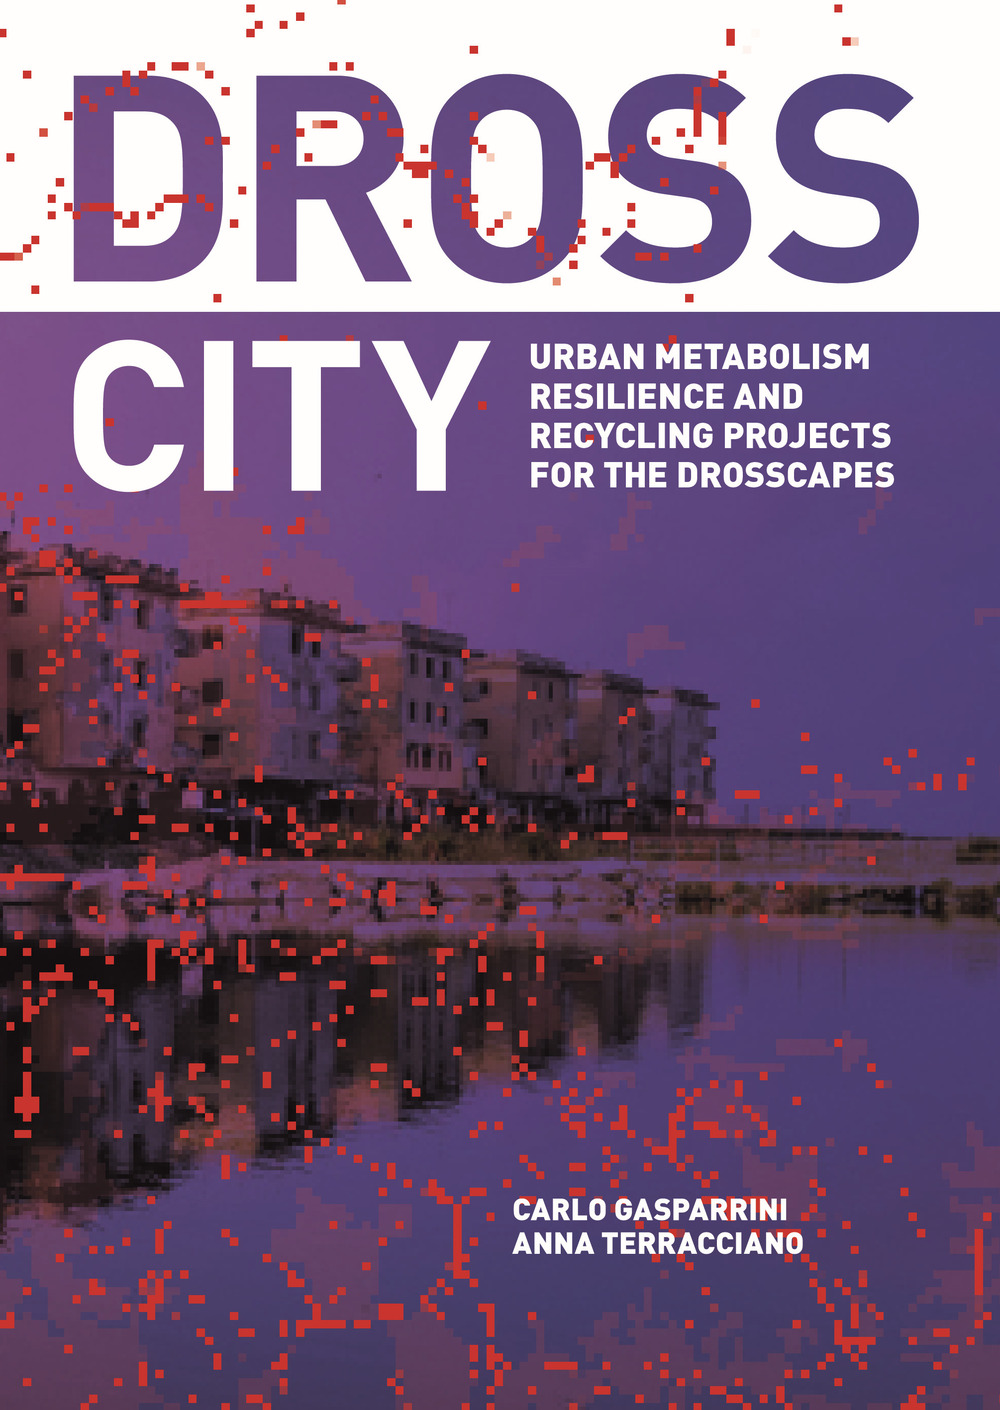 Dross City. Urban metabolism resilience and dross-scape recycling project